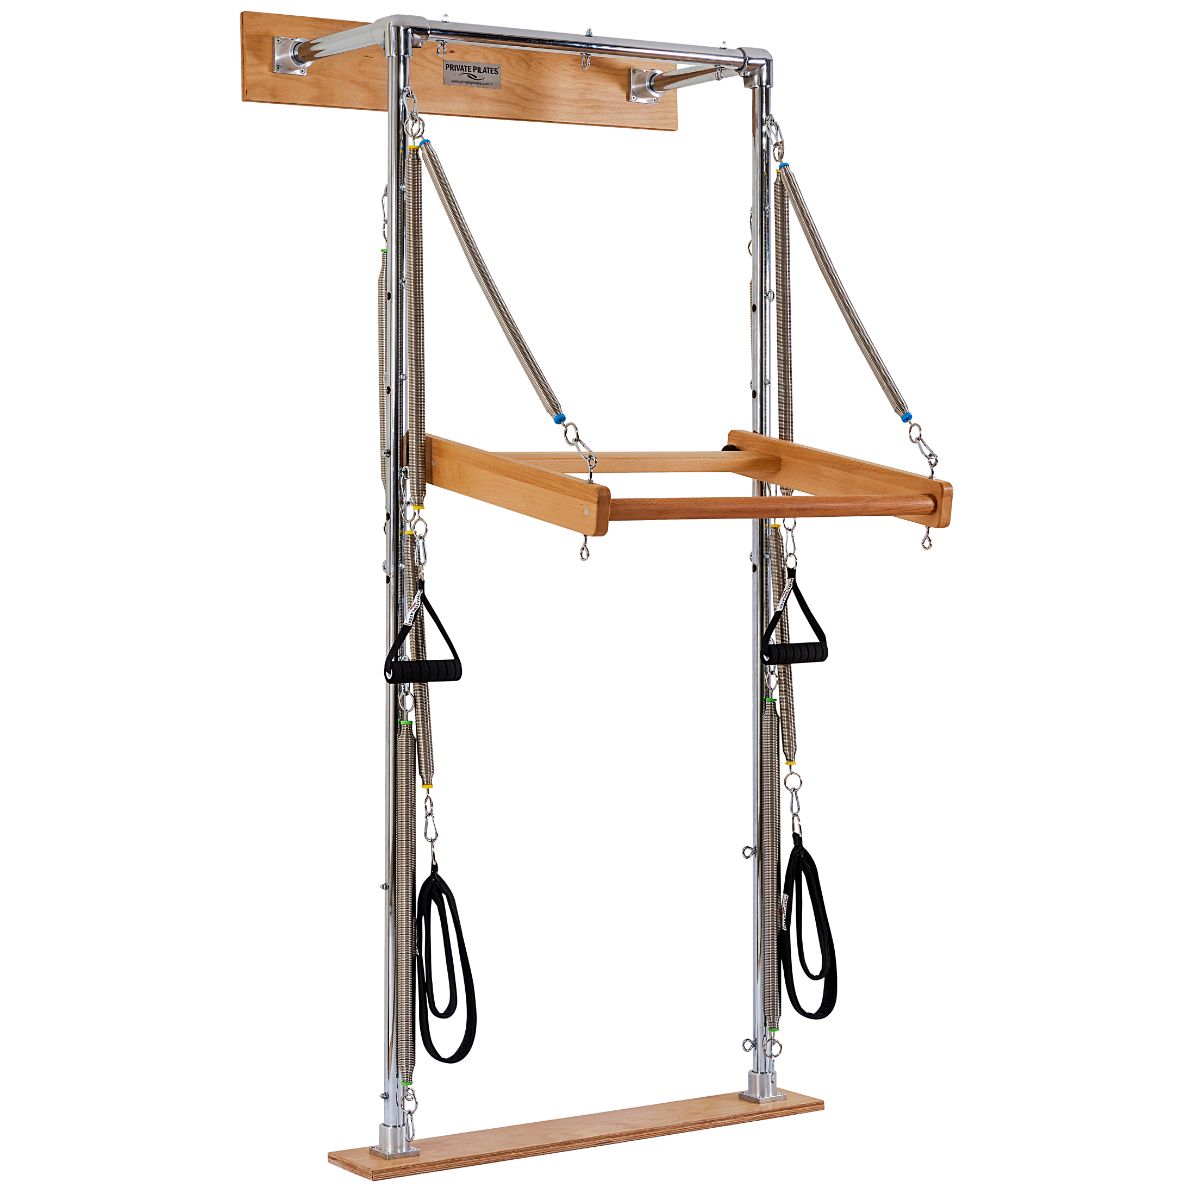 Buy Private Pilates Premium Wall Tower with Free Shipping